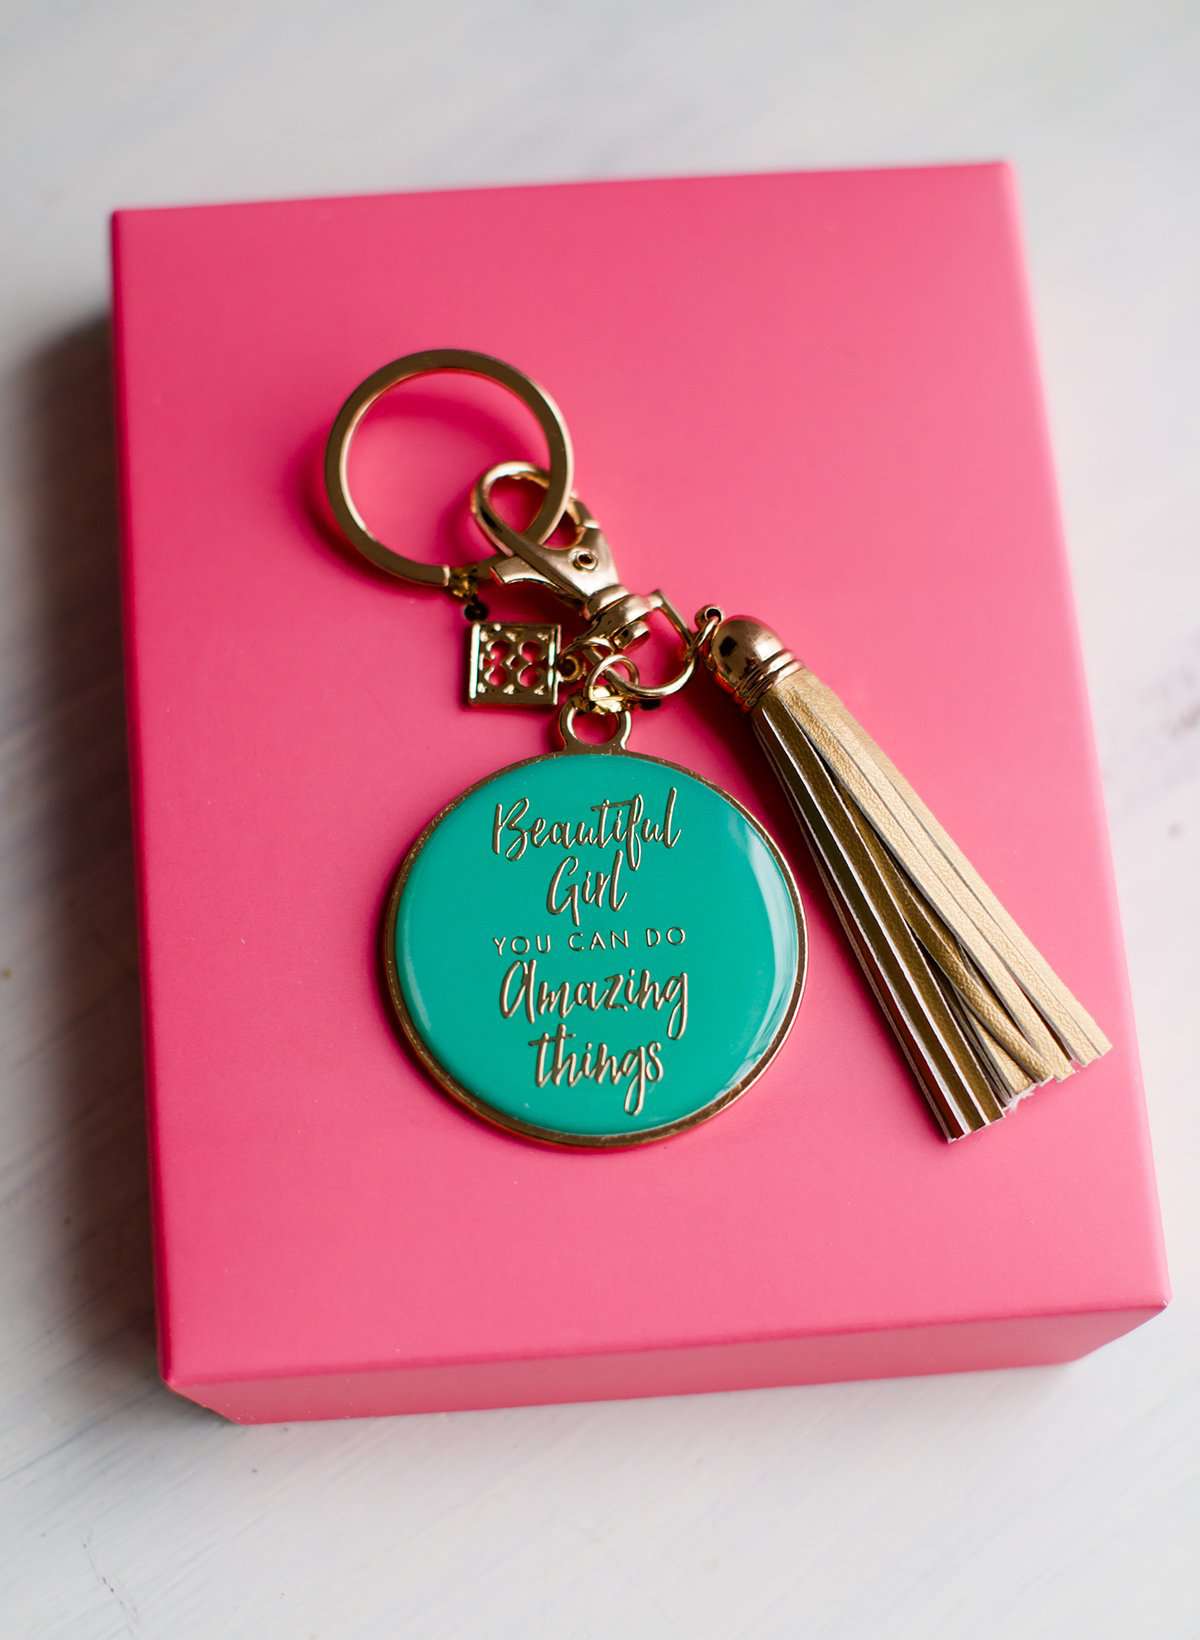 Mint key chain in a floral gift box